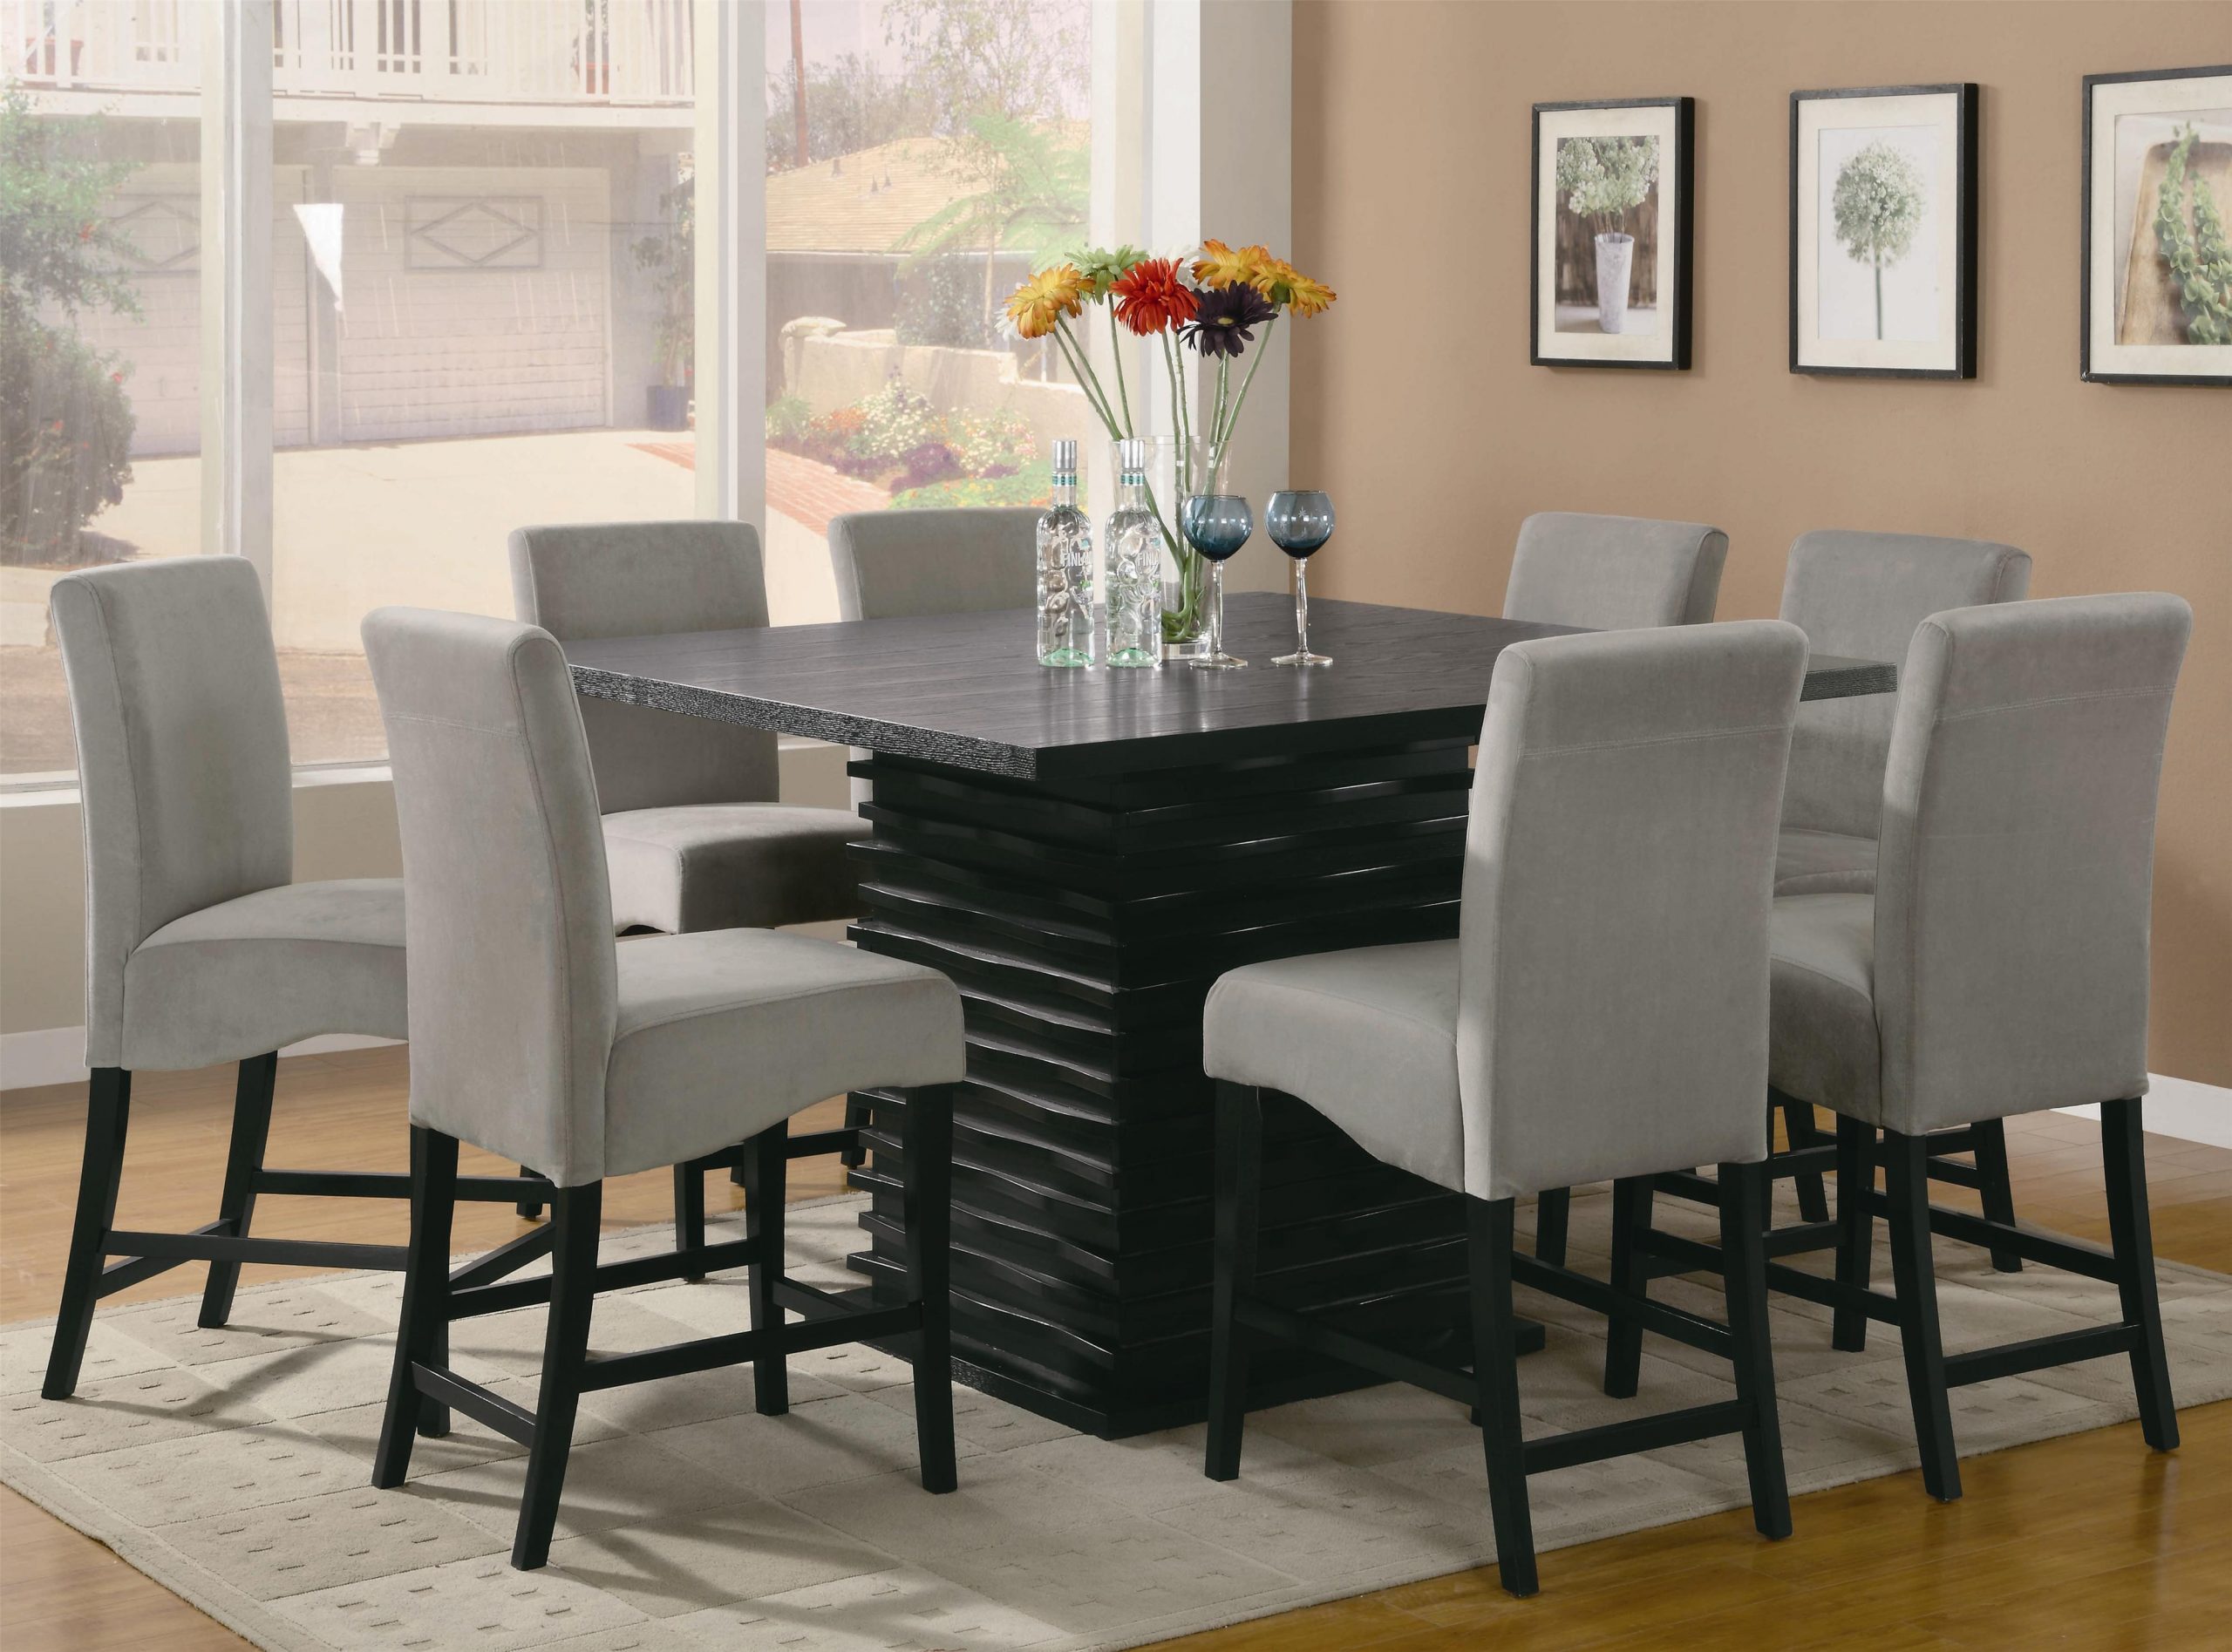 Coaster Stanton 9 Piece Table And Chair Set Dunk Bright in dimensions 4000 X 2961